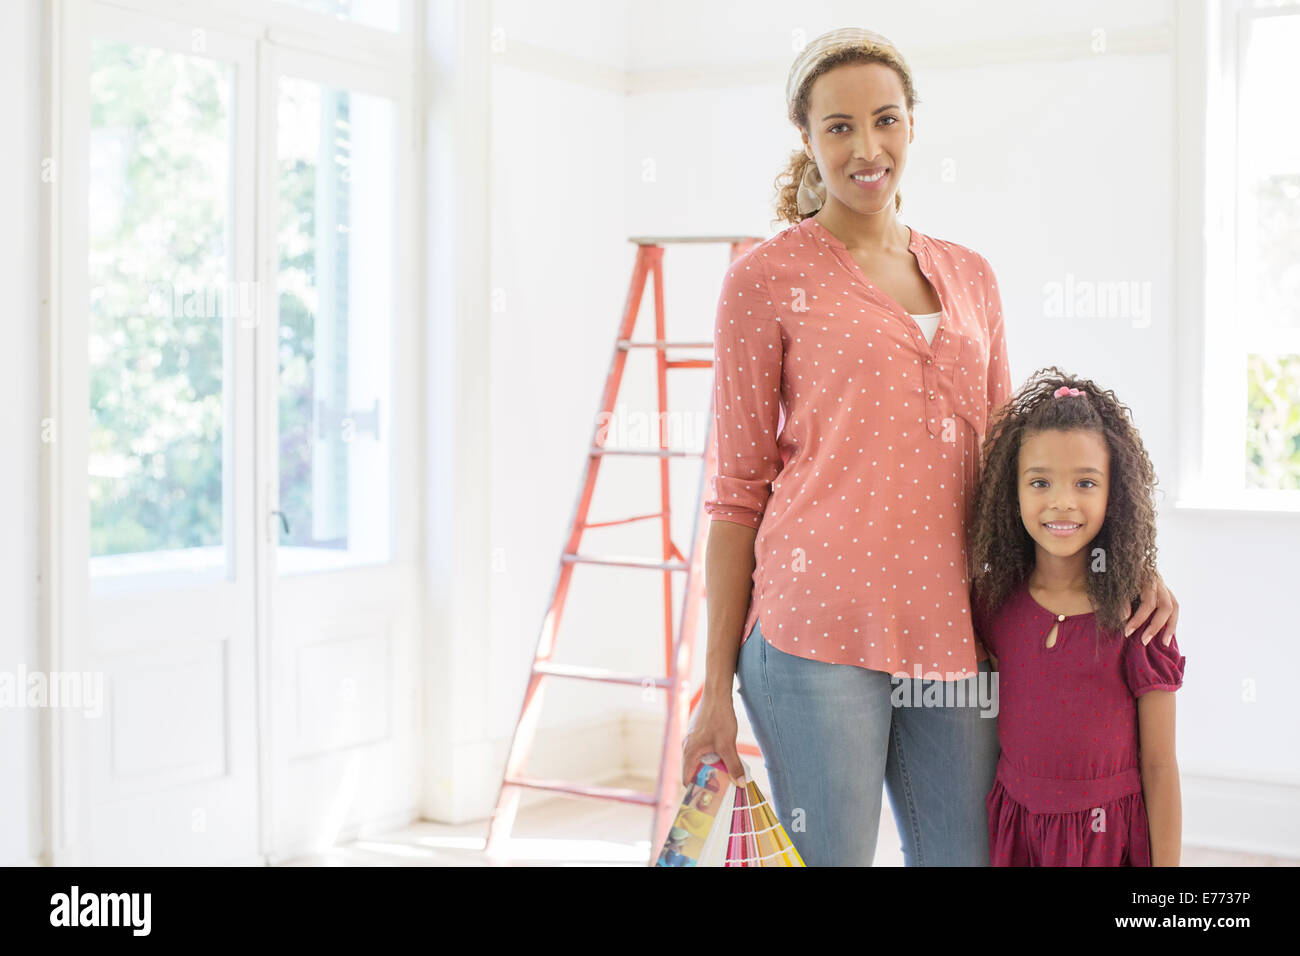 Mother and daughter smiling in living space Stock Photo